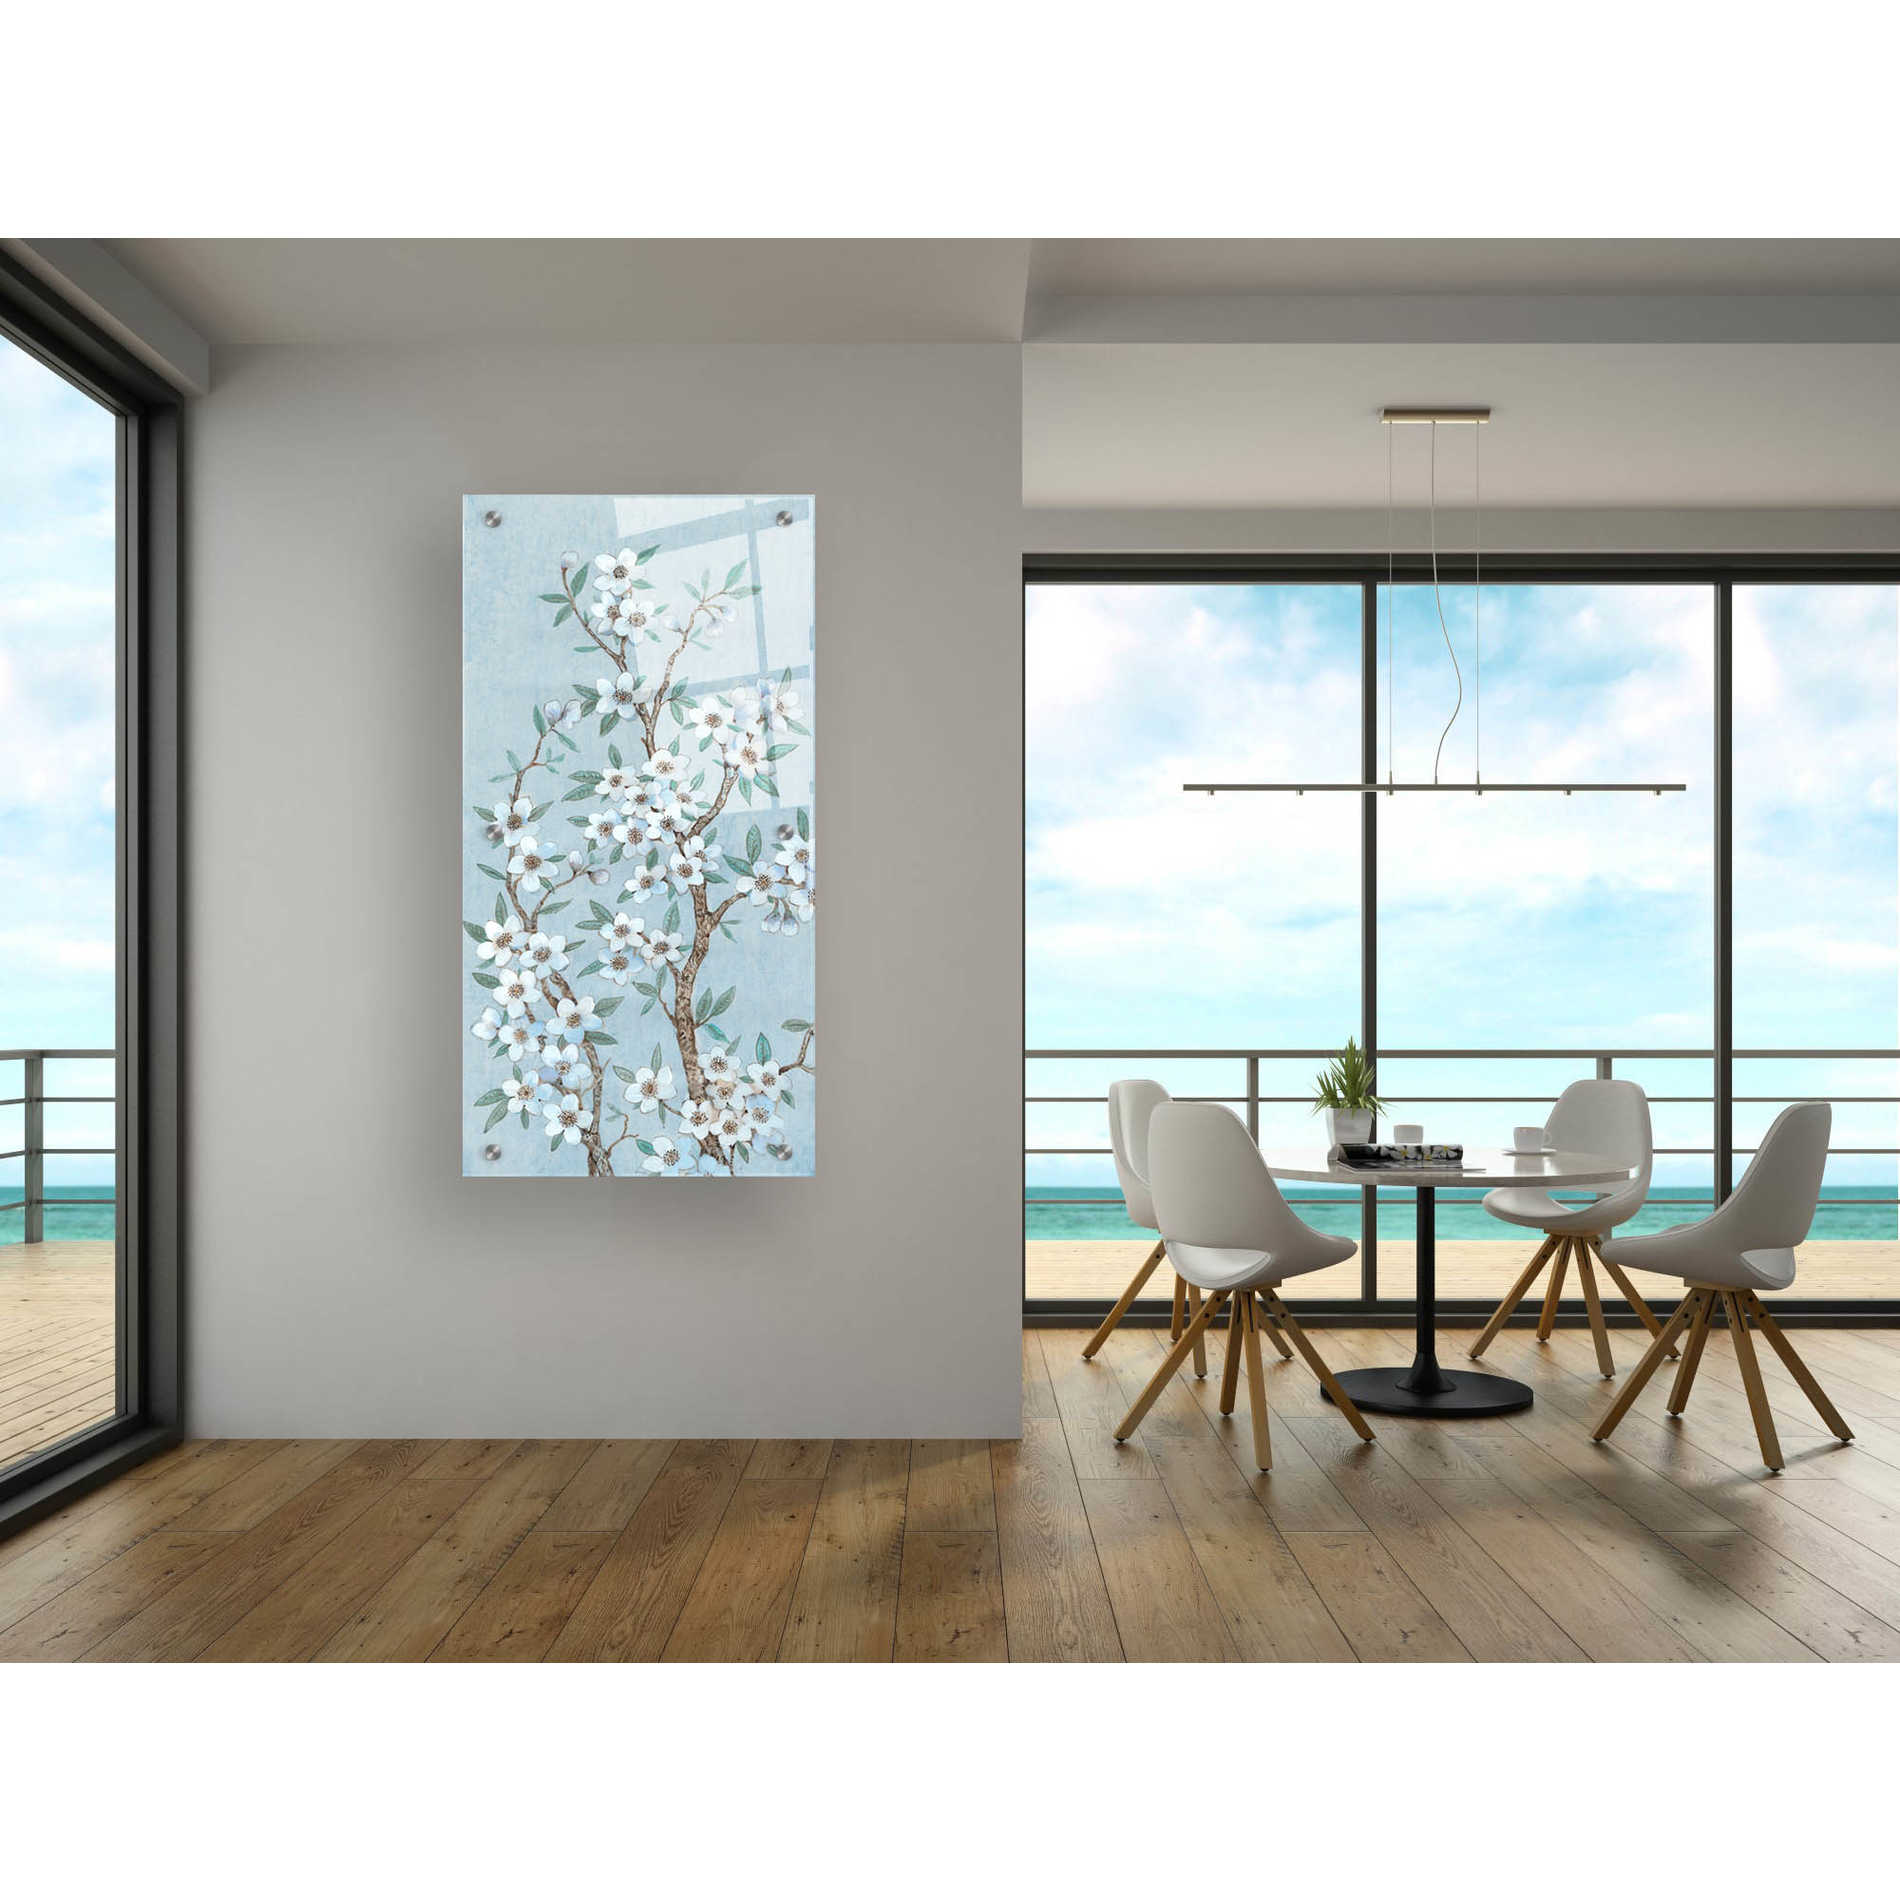 Epic Art 'Branches of Blossoms I' by Tim O'Toole, Acrylic Glass Wall Art,24x48